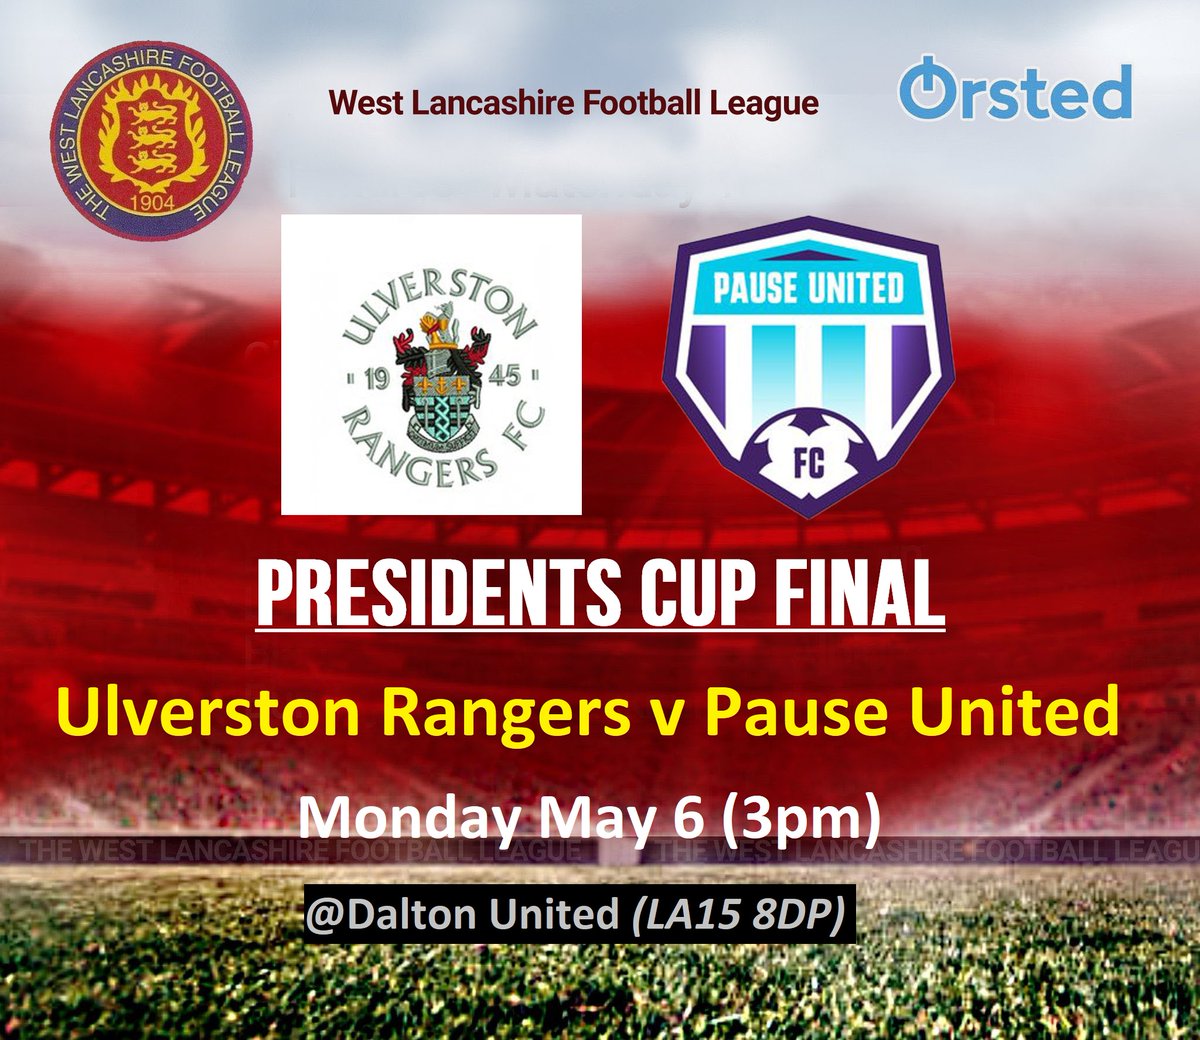 🏆𝗣𝗥𝗘𝗦𝗜𝗗𝗘𝗡𝗧𝗦 𝗖𝗨𝗣 𝗙𝗜𝗡𝗔𝗟🏆 Entry is £6 and £3 concessions. @UlvRangers2017 v @PauseUnited Huge thanks to @daltonunitedfc for being hosts for our third cup final